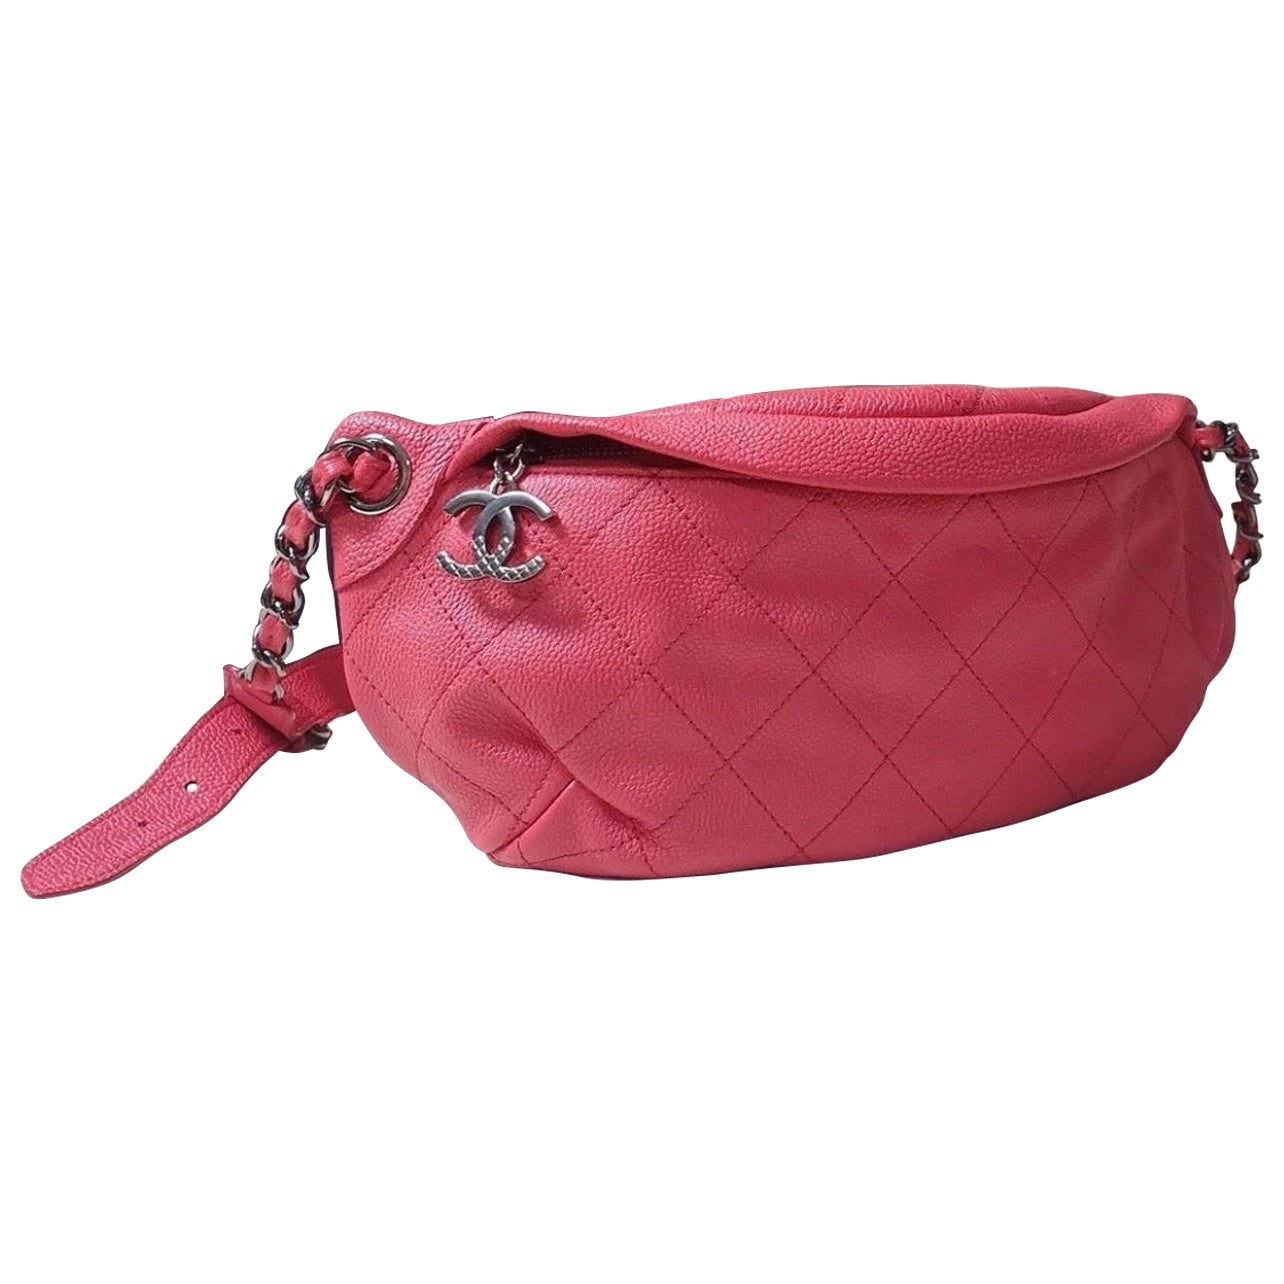 Chanel Bum Red Lambskin Fanny Pack Waist Belt Leather Bag For Sale